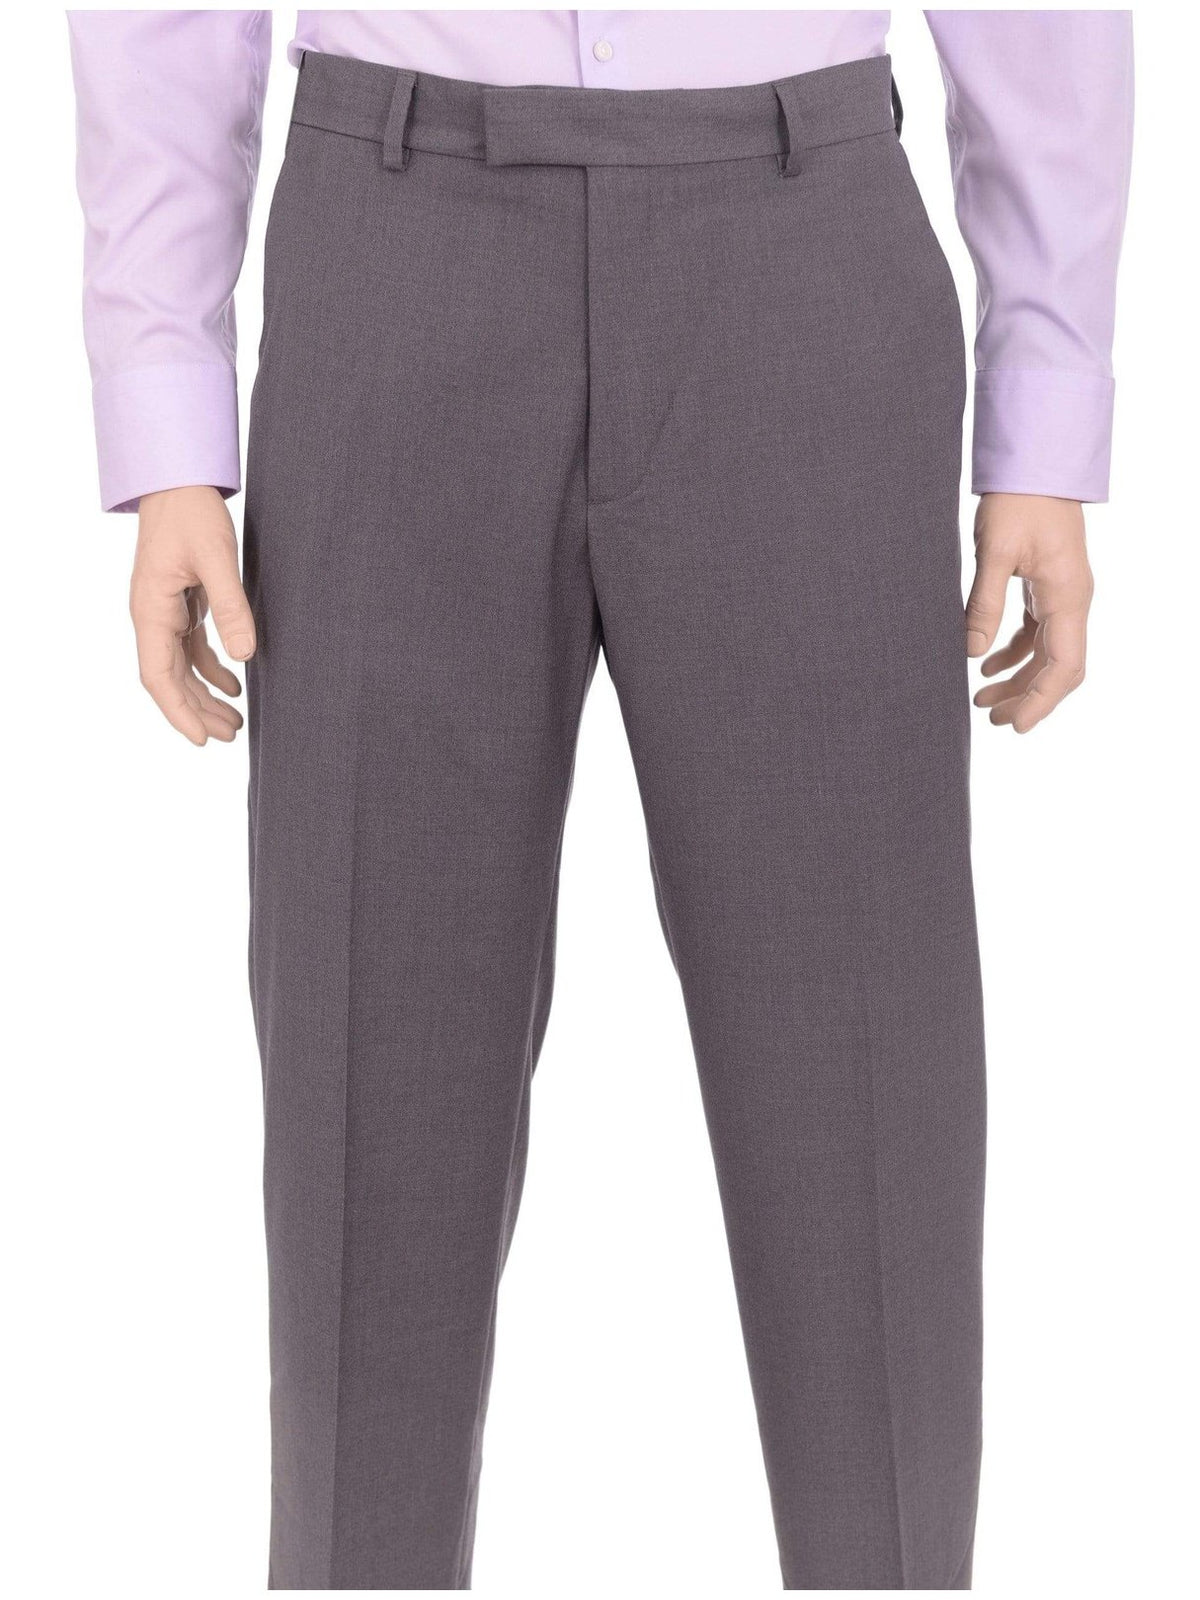 Kenneth Cole Reaction PANTS 36X32 Kenneth Cole Reaction Regular Fit Solid Gray Flat Front Washable Dress Pants